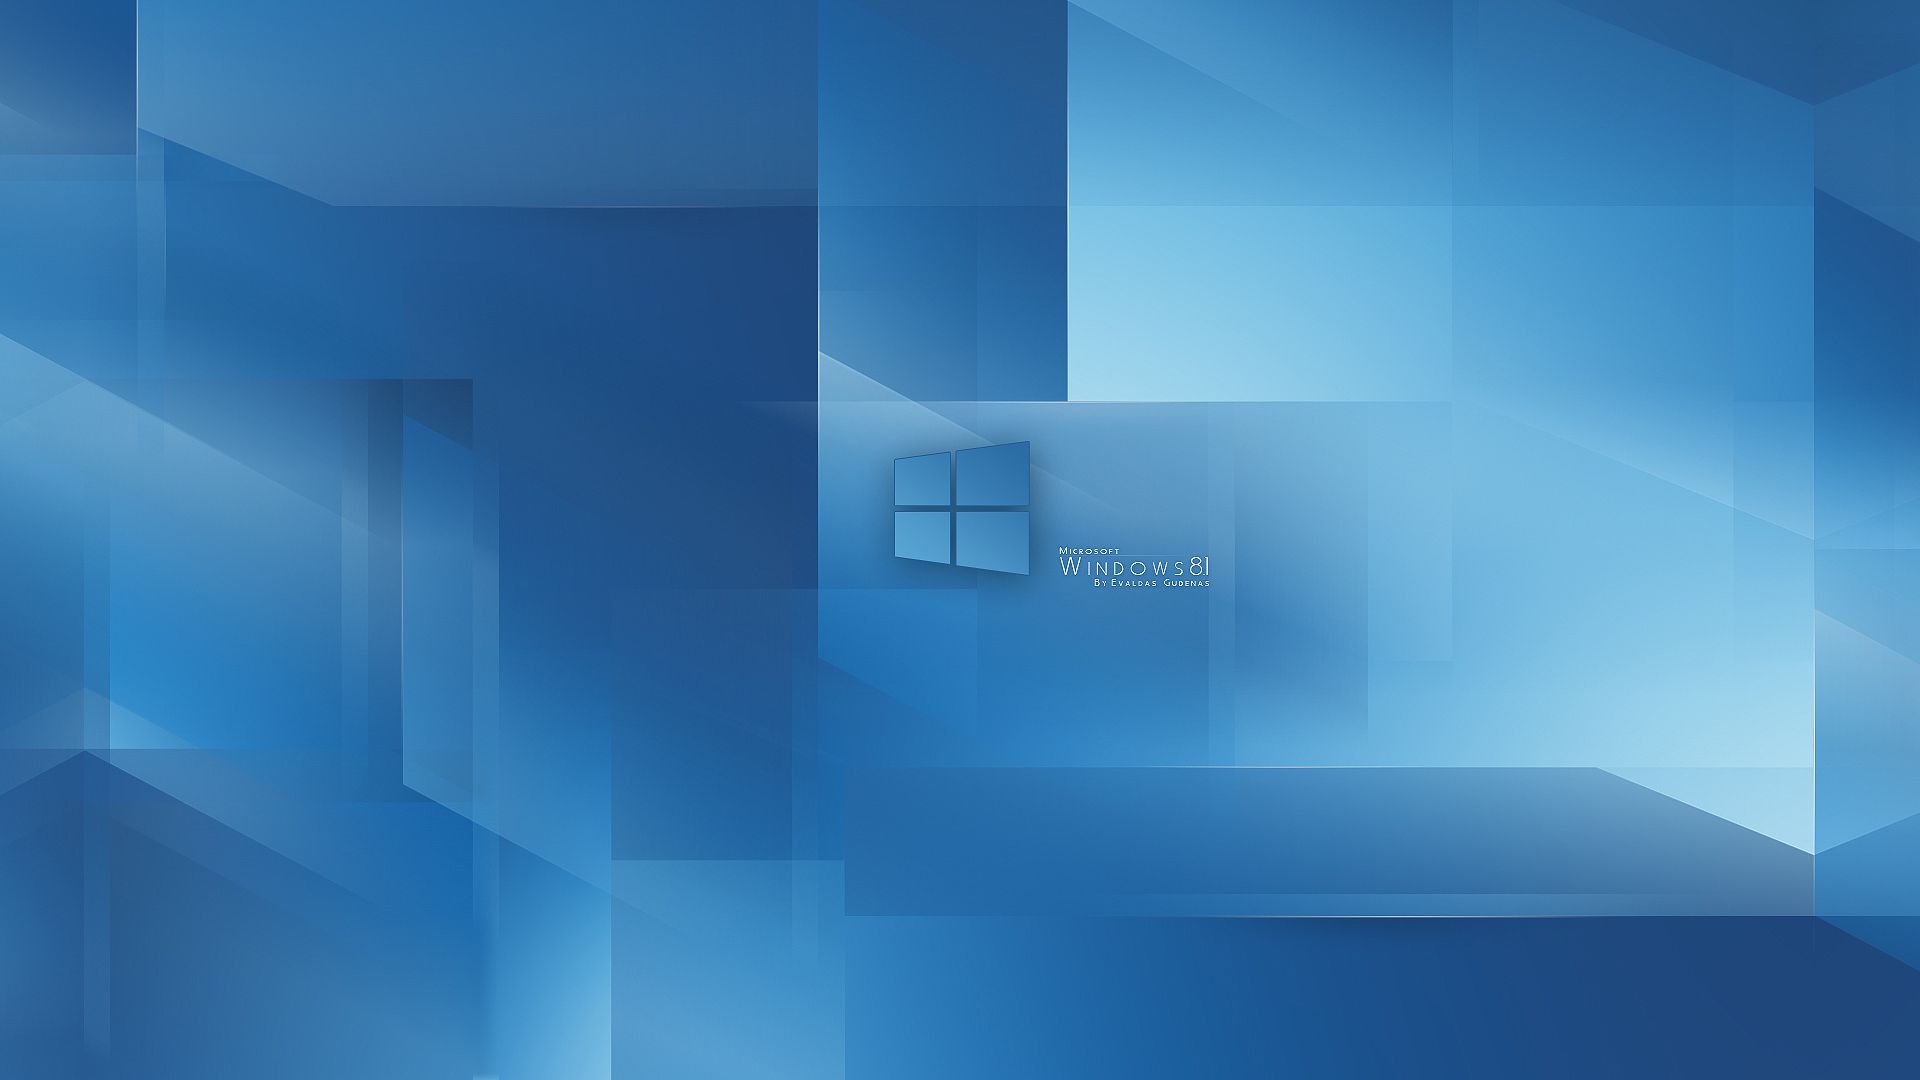 More Windows 8.1 wallpapers Windows 8 wallpapers